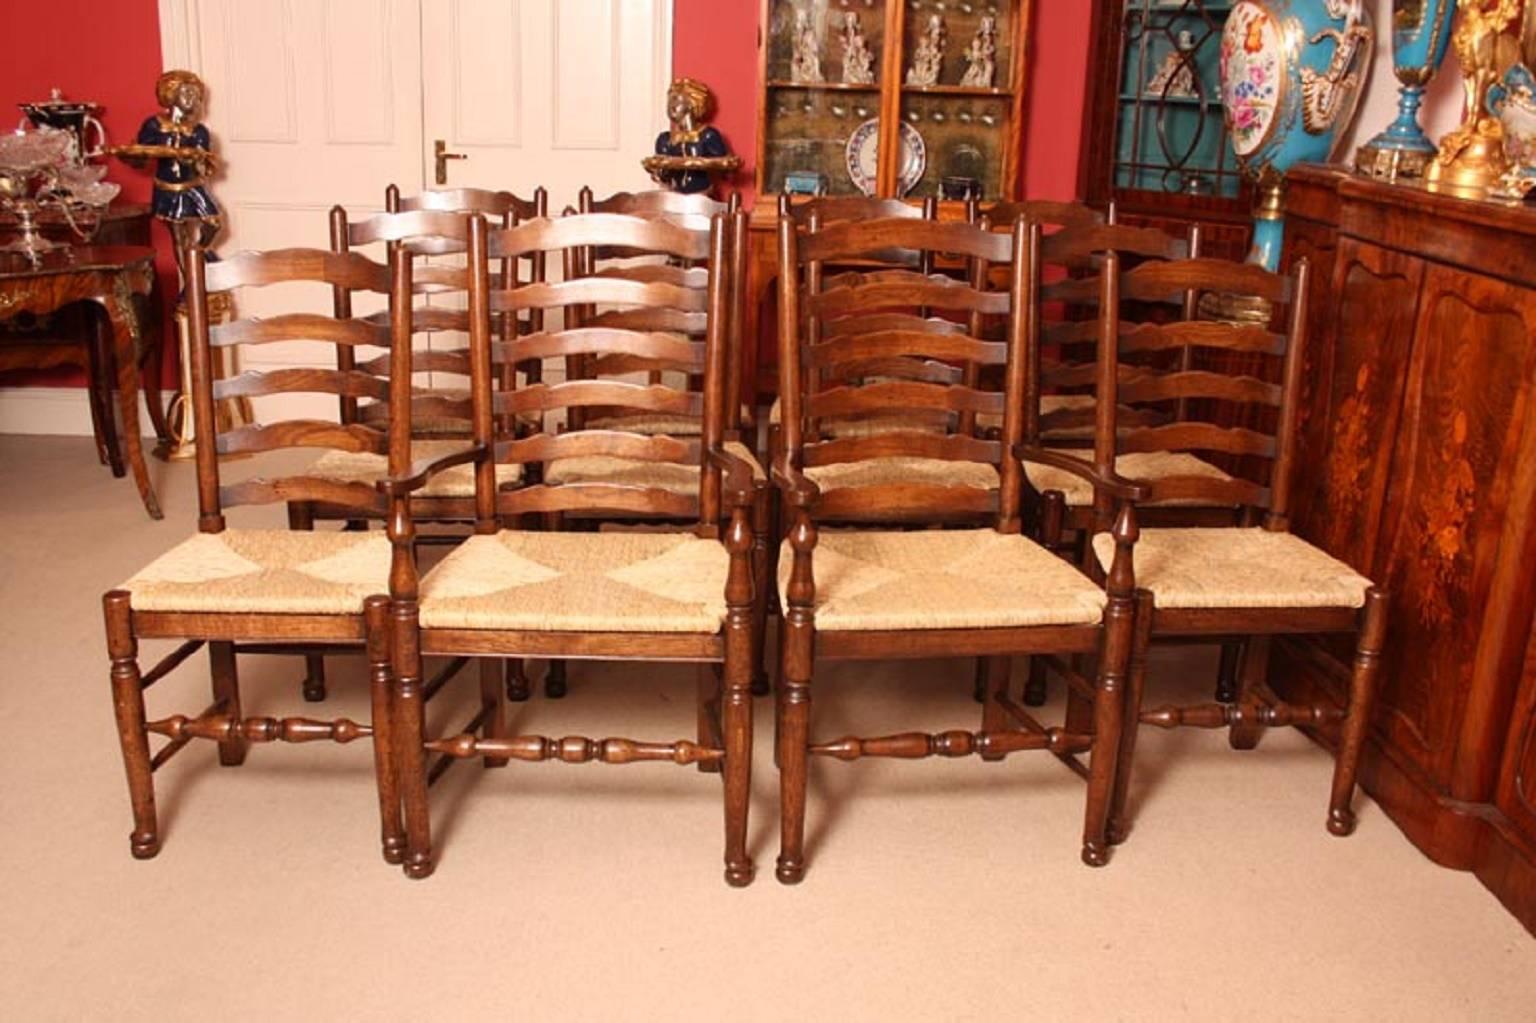 Jacobean Bespoke Solid Oak Refectory Dining Table & 10 Chairs